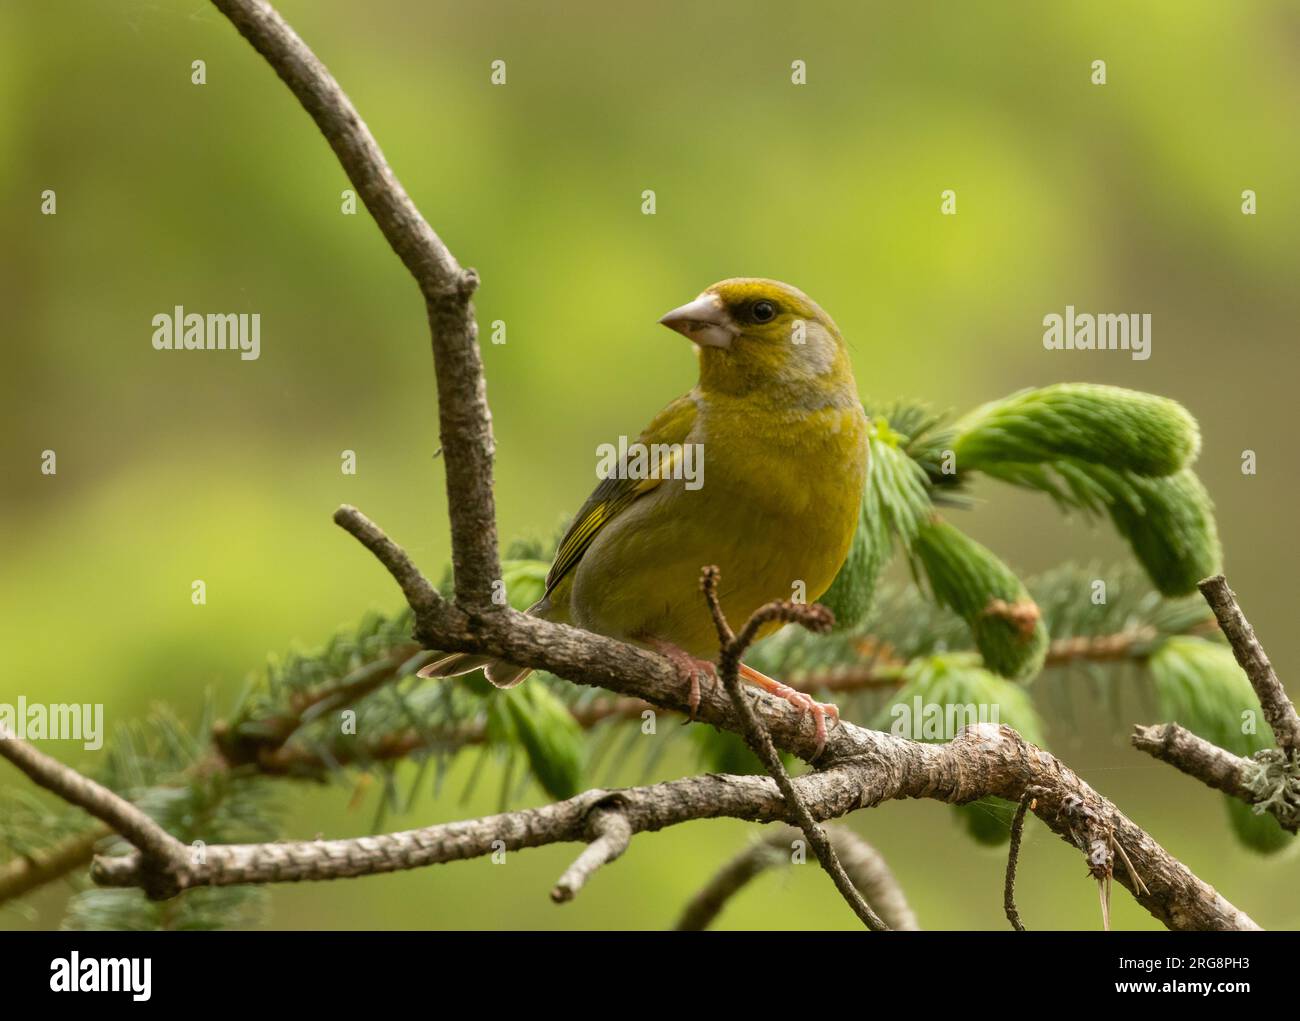 Greenfinch bird perched on a branch in the woodland with natural green forest background Stock Photo